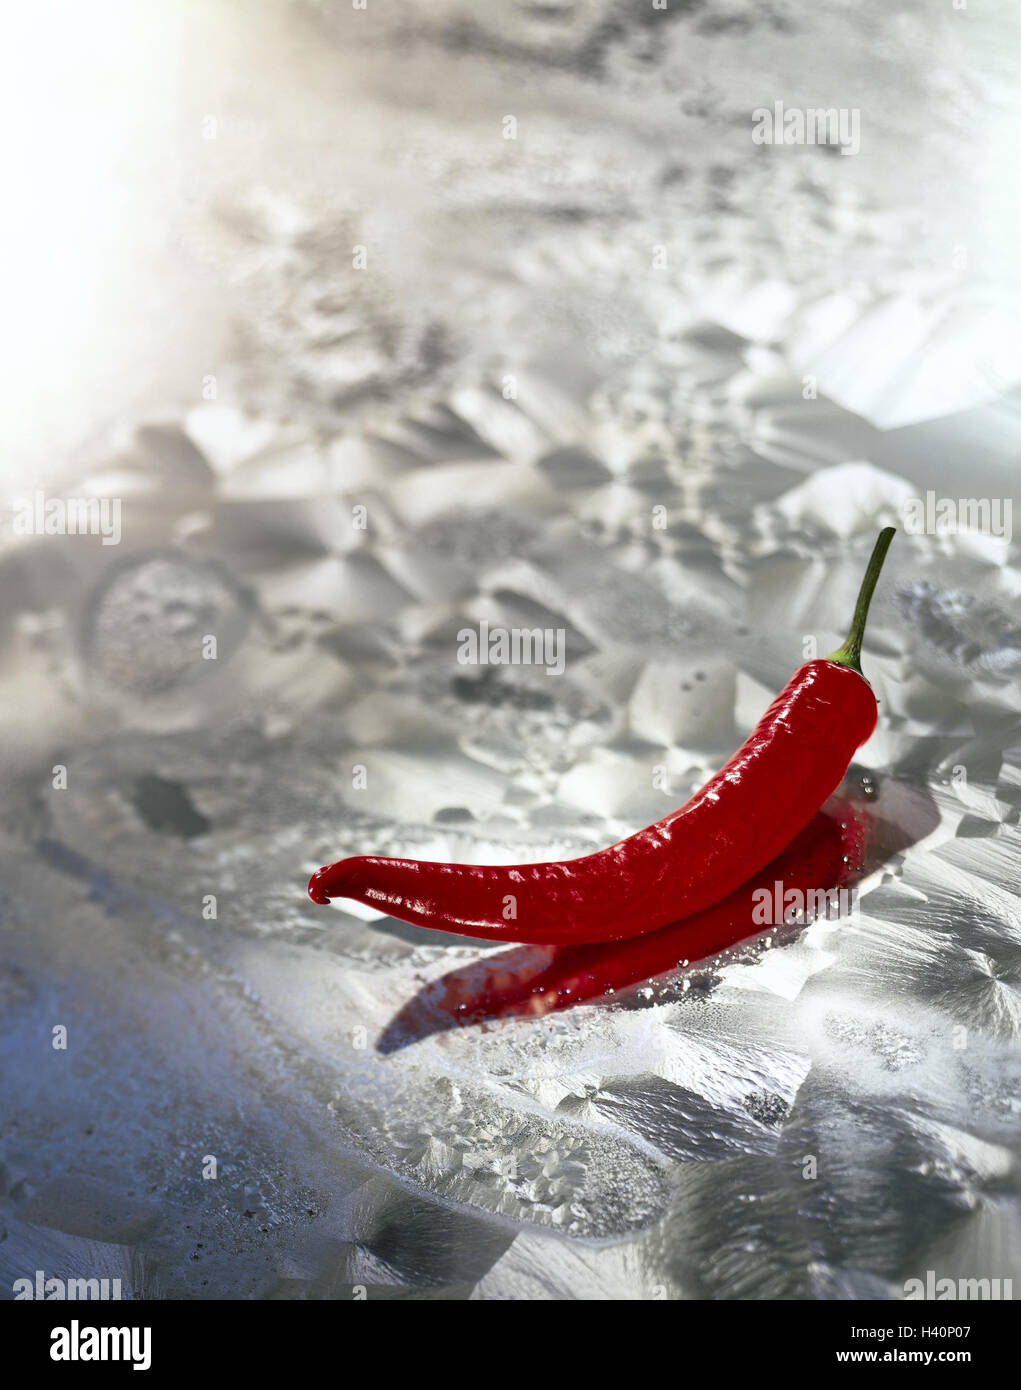 Chilli, red, reflector, freezes over, frost flowers, hot, sharpness, spicy, spice, spice, paprika, Chilli, chilli pod, icon, contrast, difference, hotly, coldly, situation, perilously, explosive, hot, highly currently, delicately, explosive, parchingly, i Stock Photo